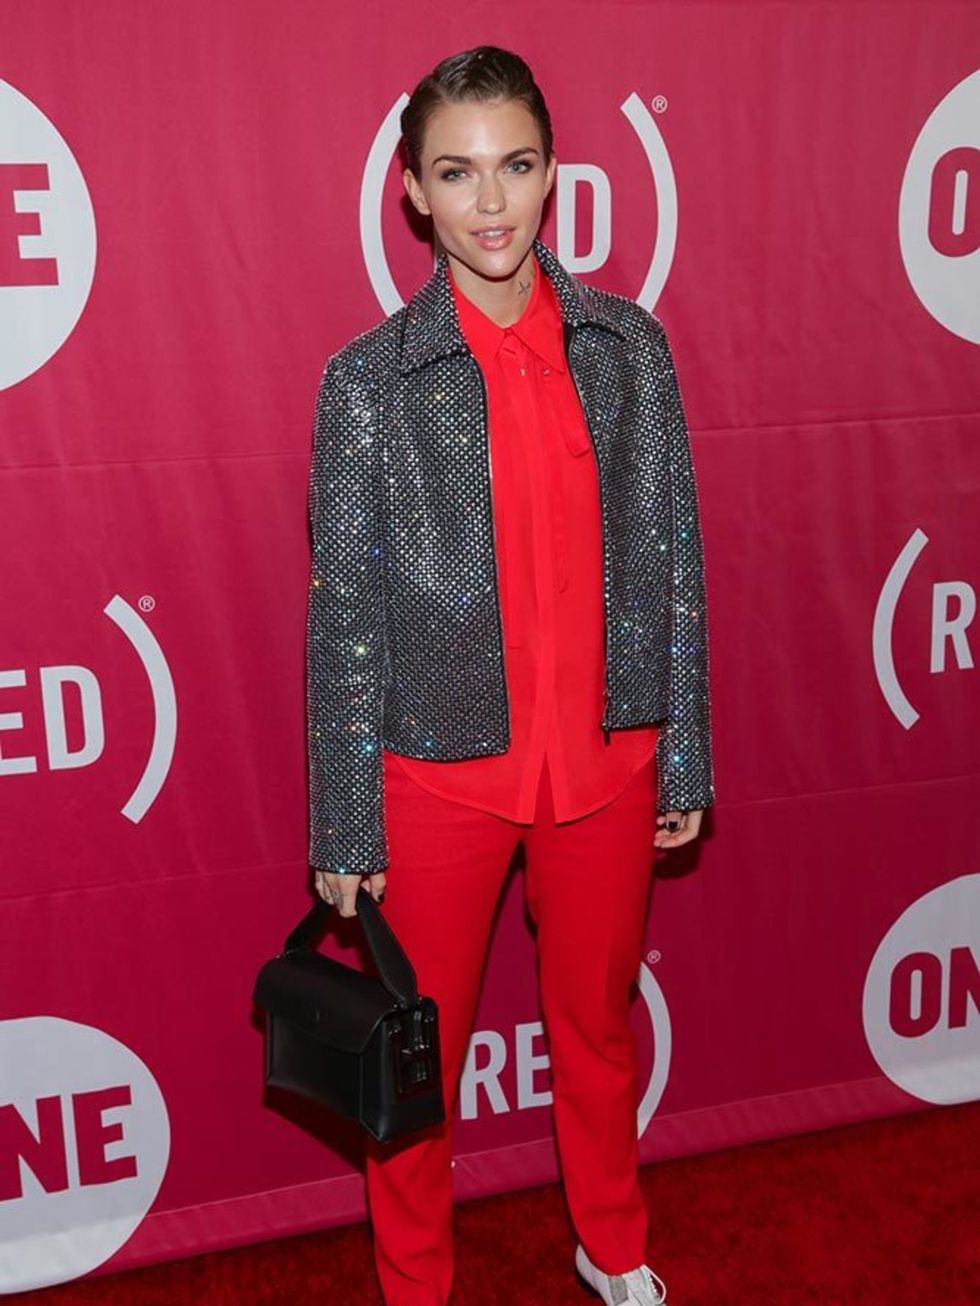 Ruby Rose attends a fashion even in New York, December 2015.